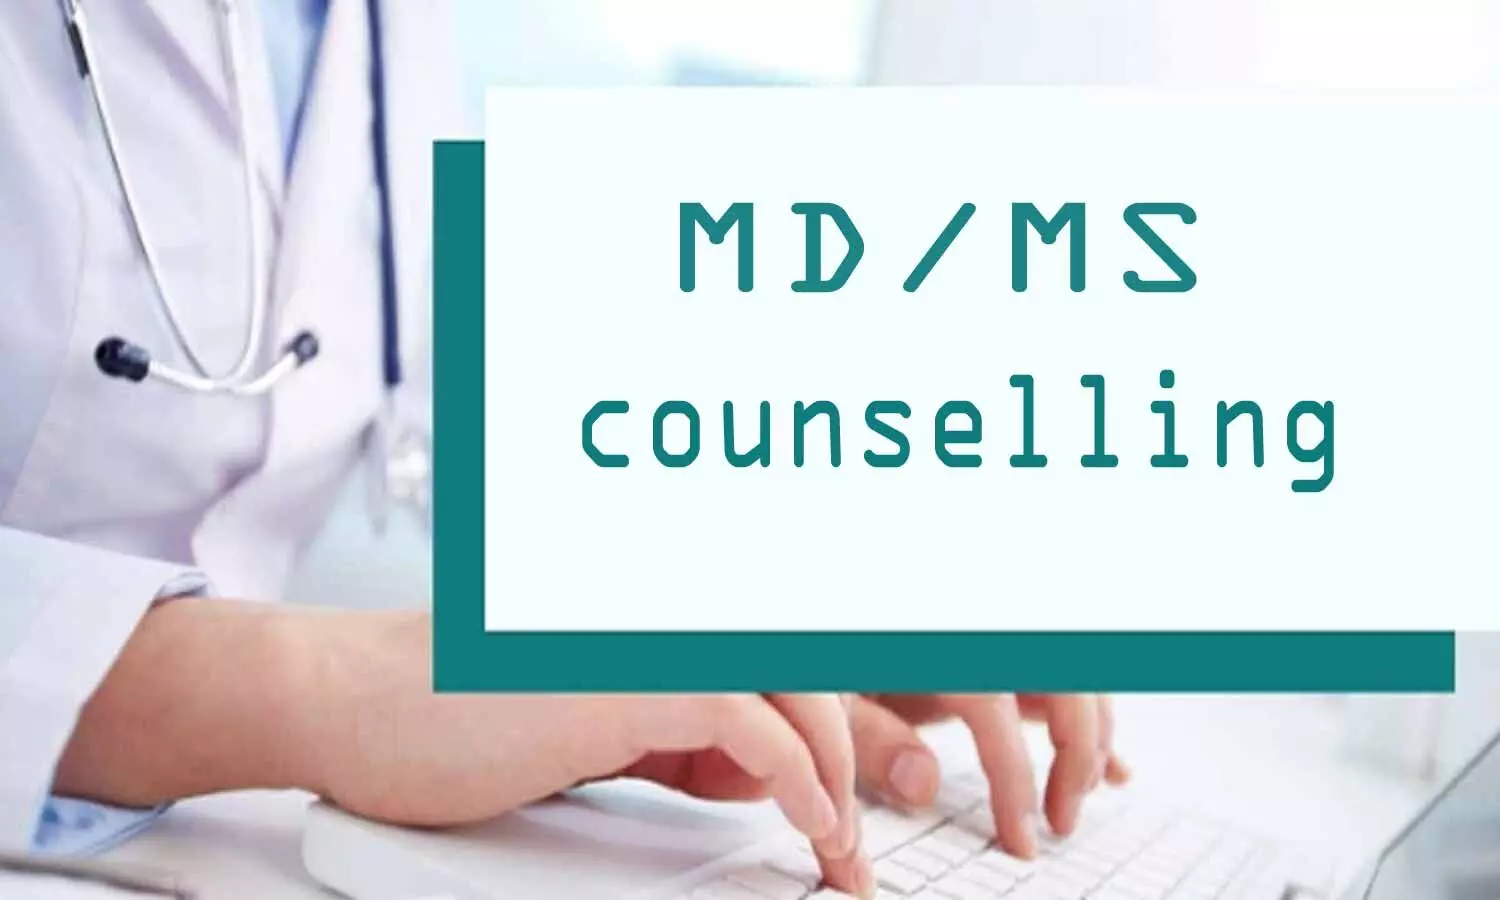 MD, MS Counselling at JIPMER: View Schedule, eligibility criteria, procedure, fee details for open round